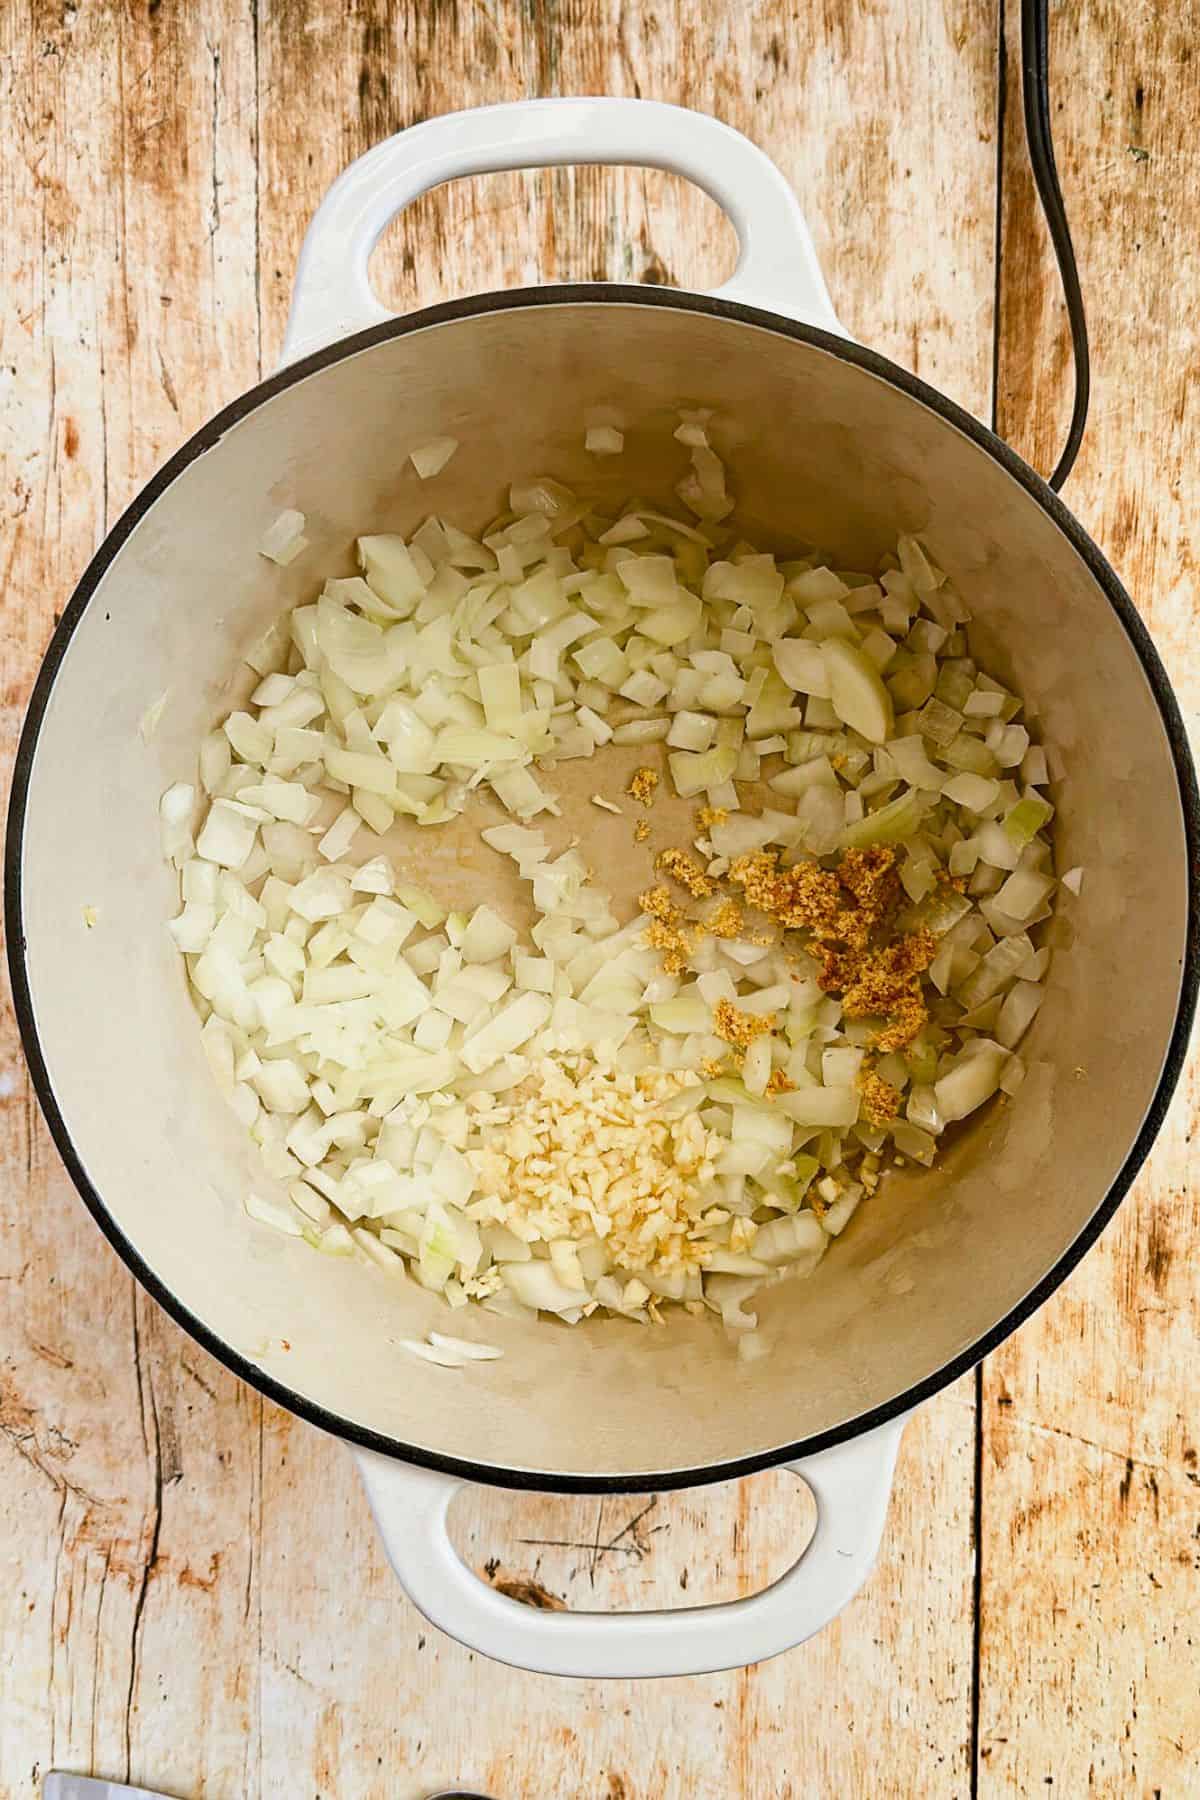 onions, garlic, and ginger in a pot ready to saute